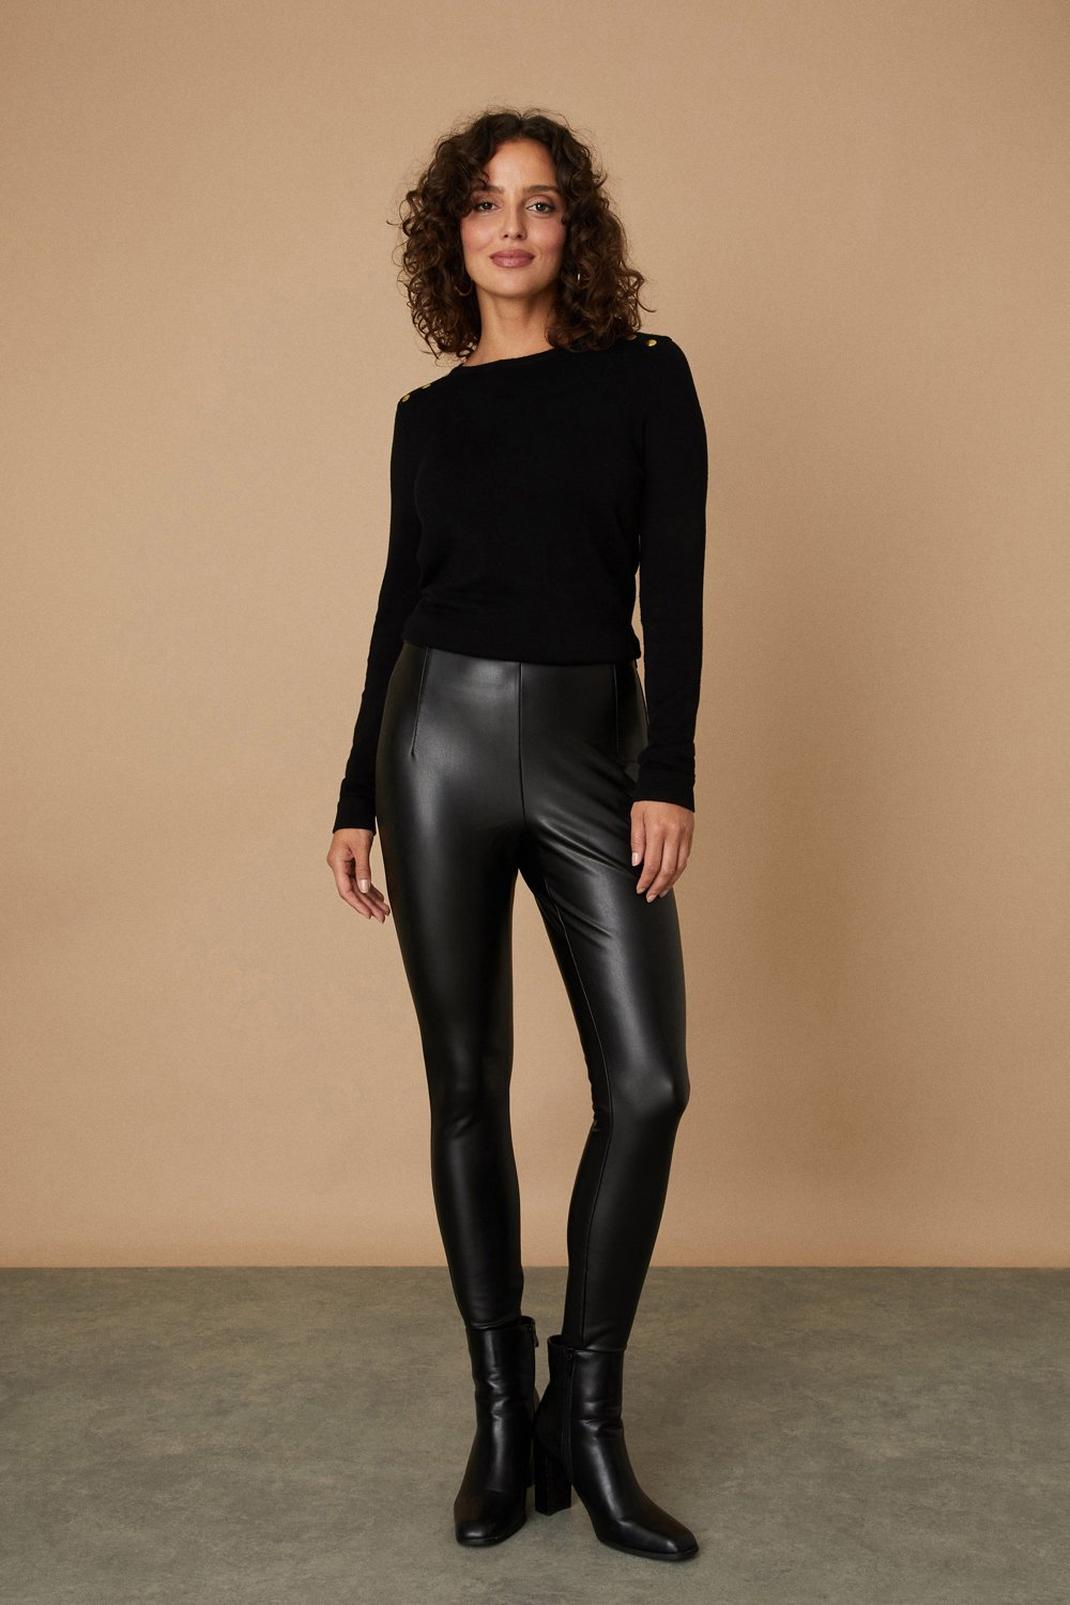 Ruth Stylez High-Waist Faux Leather Leggings – Respect The Style